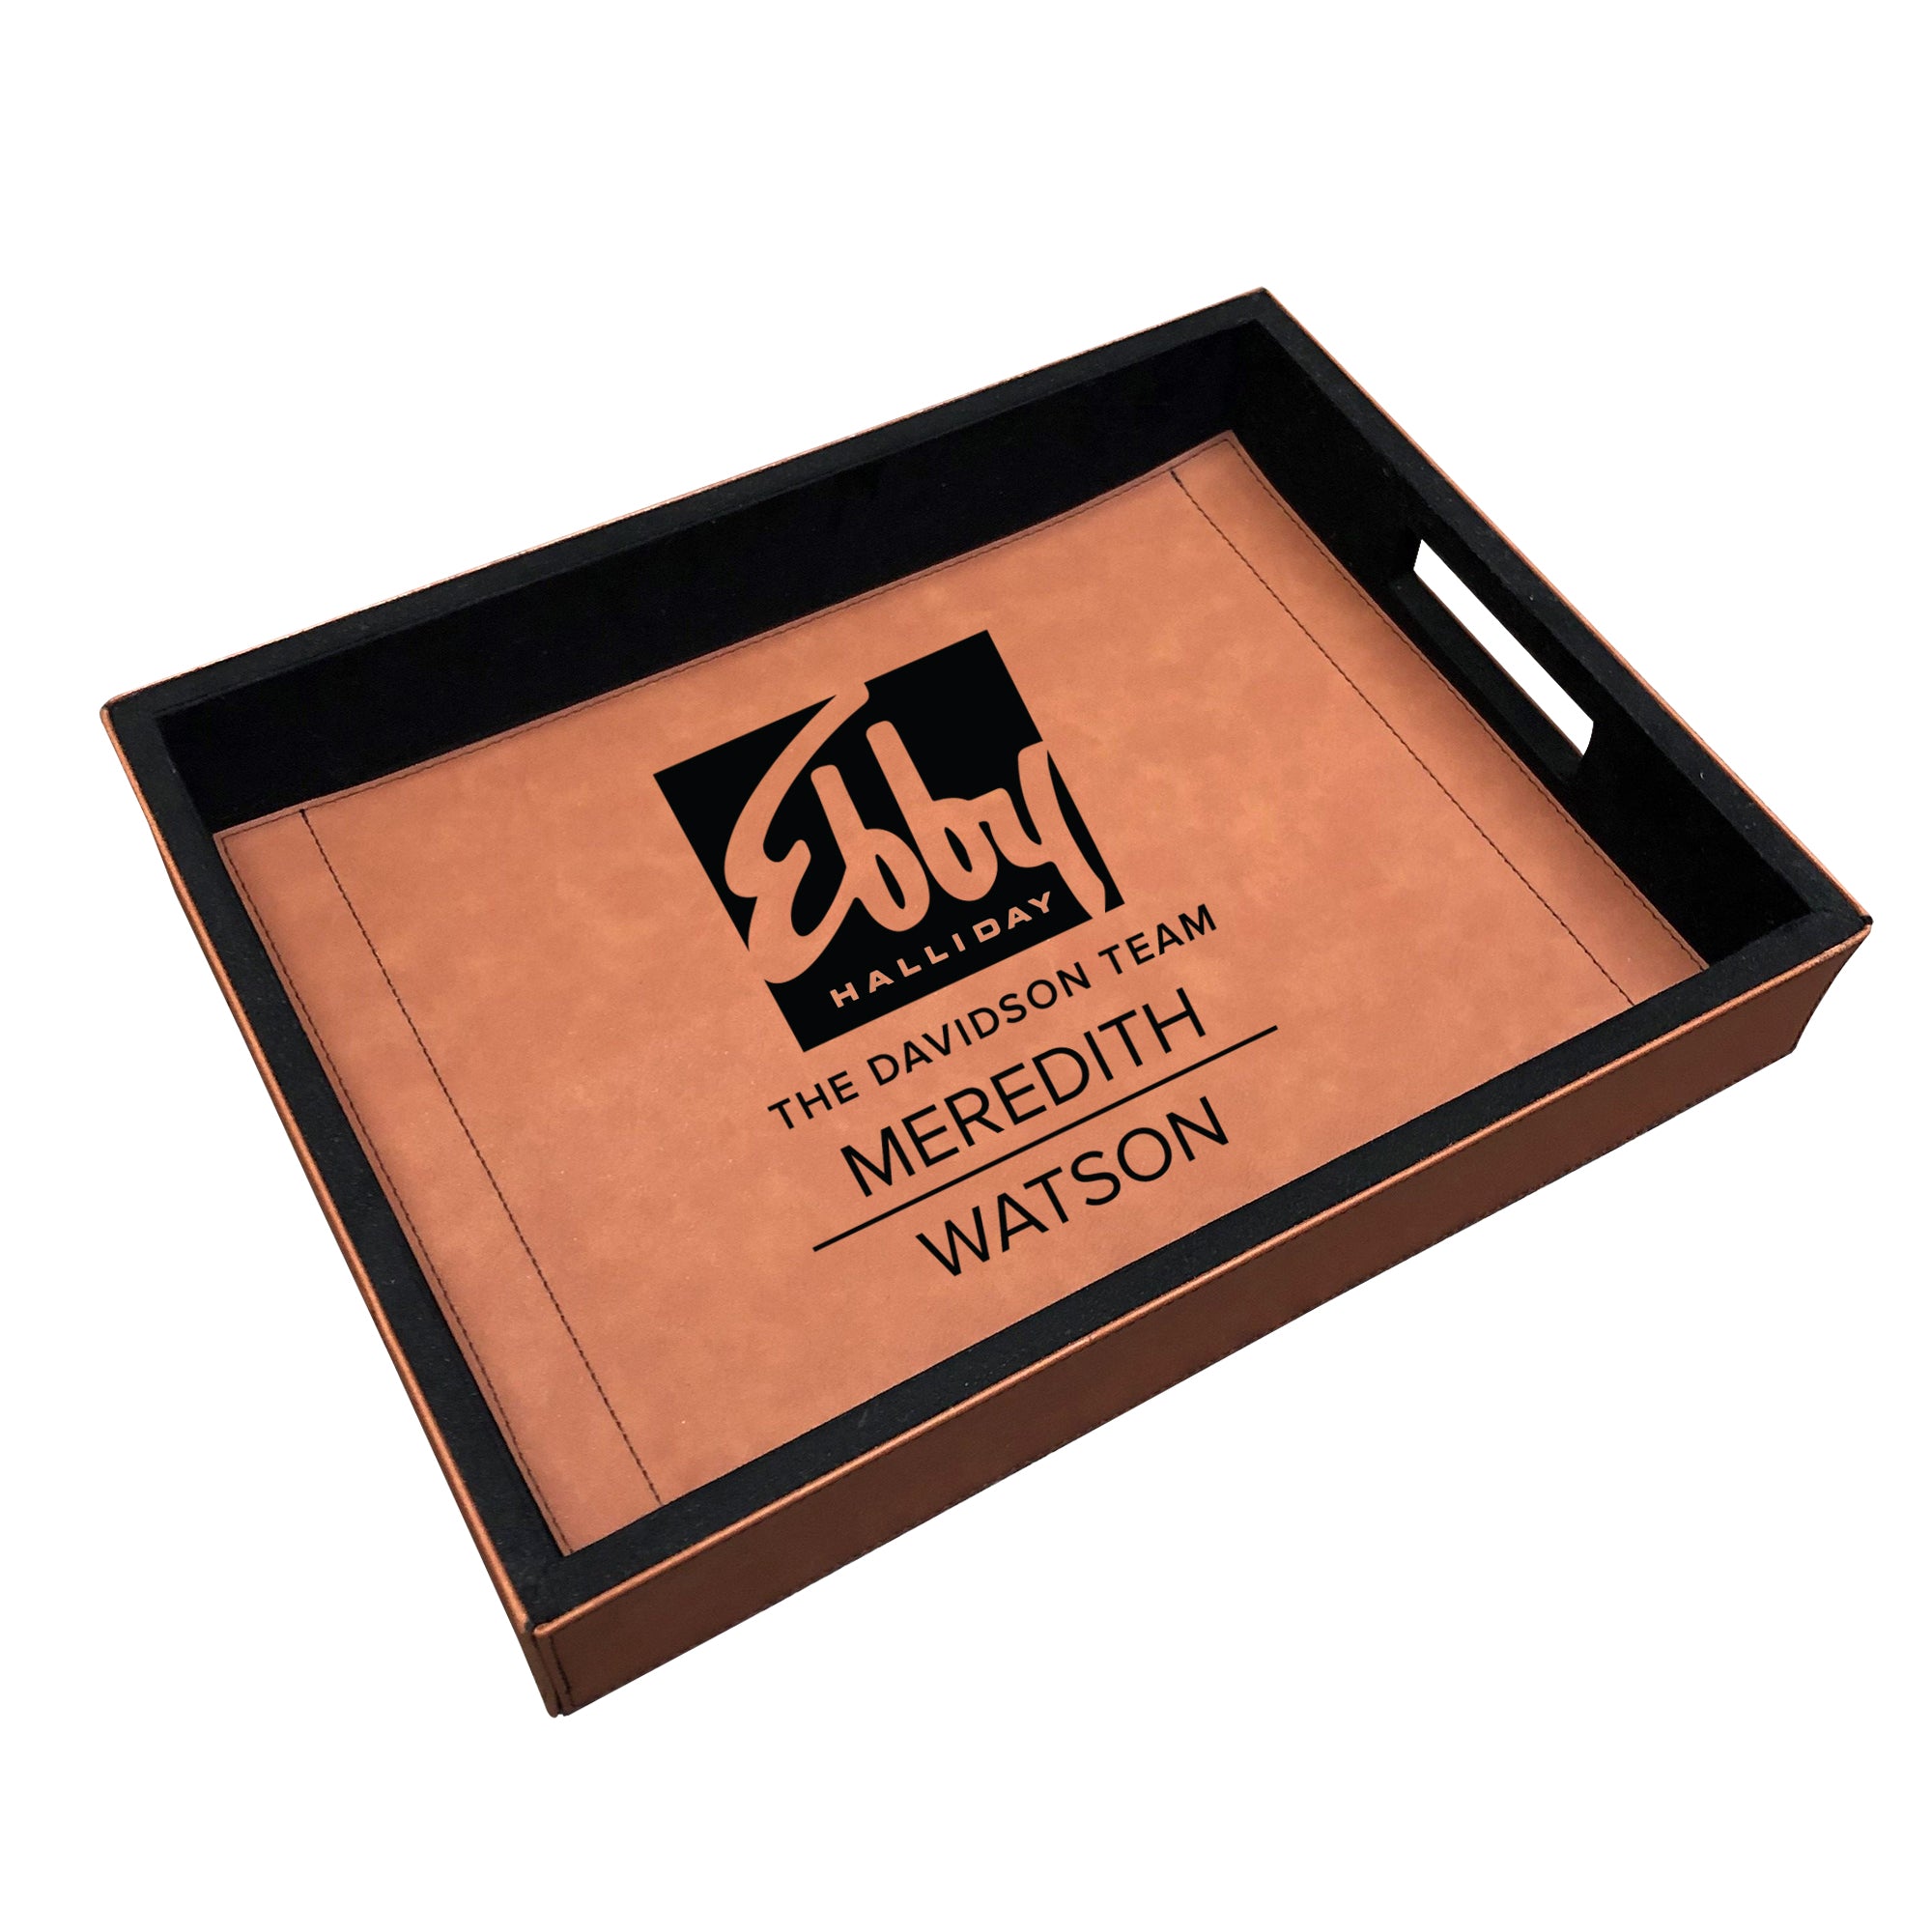 Ebby Halliday Engraved Vegan Leather Serving Tray